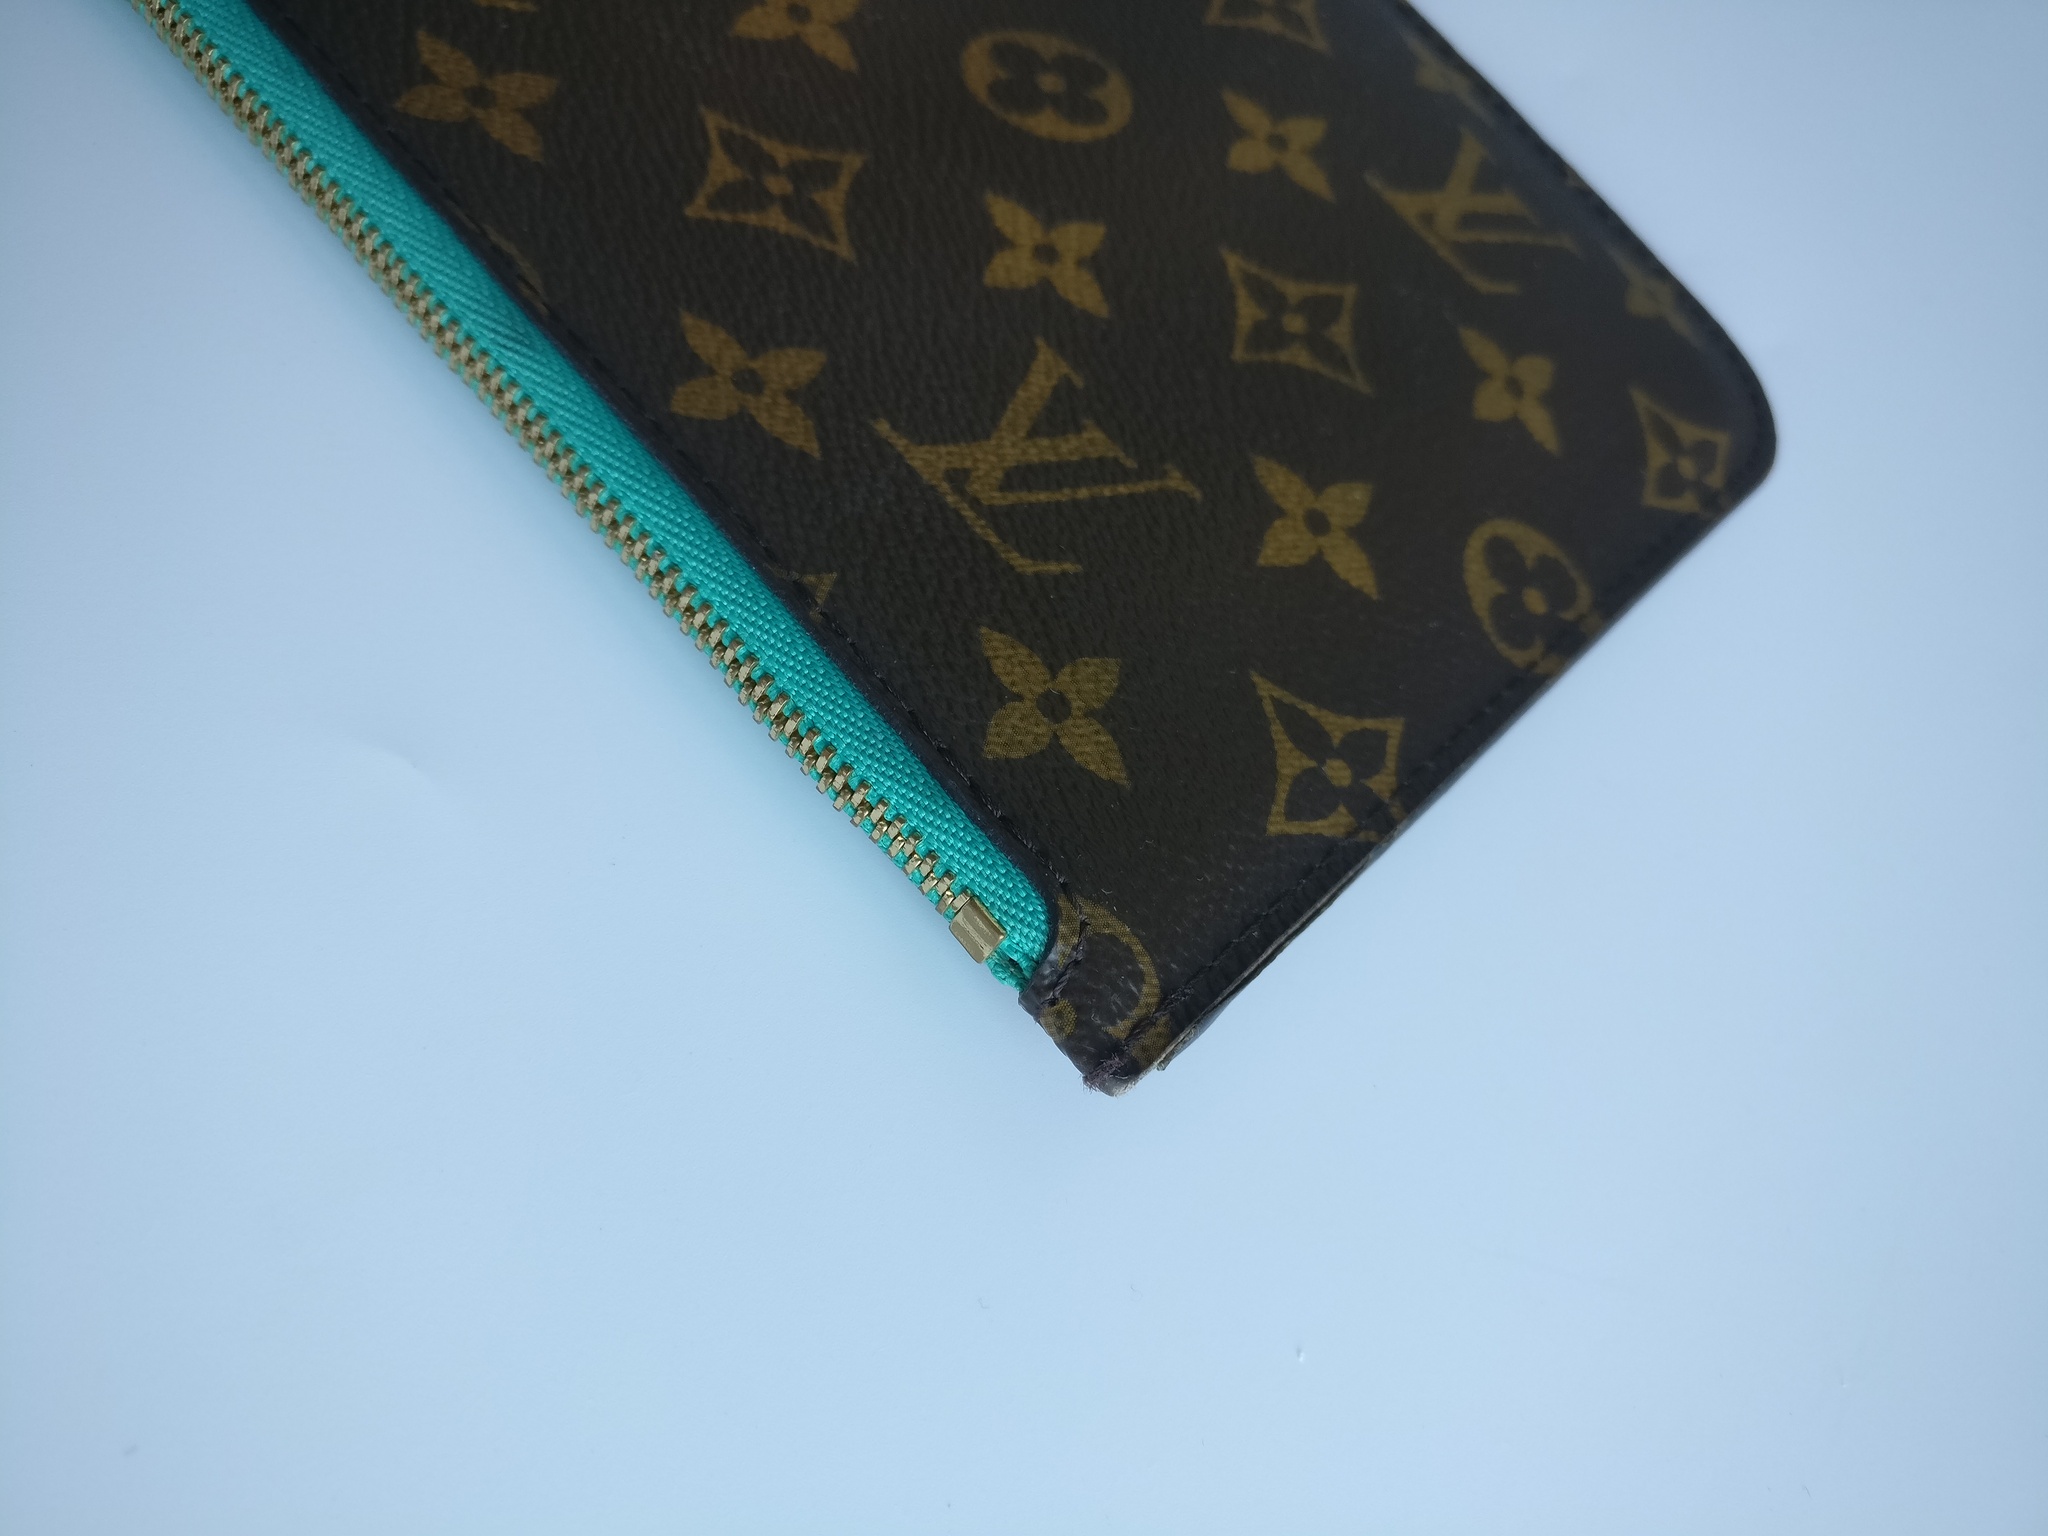 Louis Vuitton Neverfull MM pouch limited edition, V summer collection -15